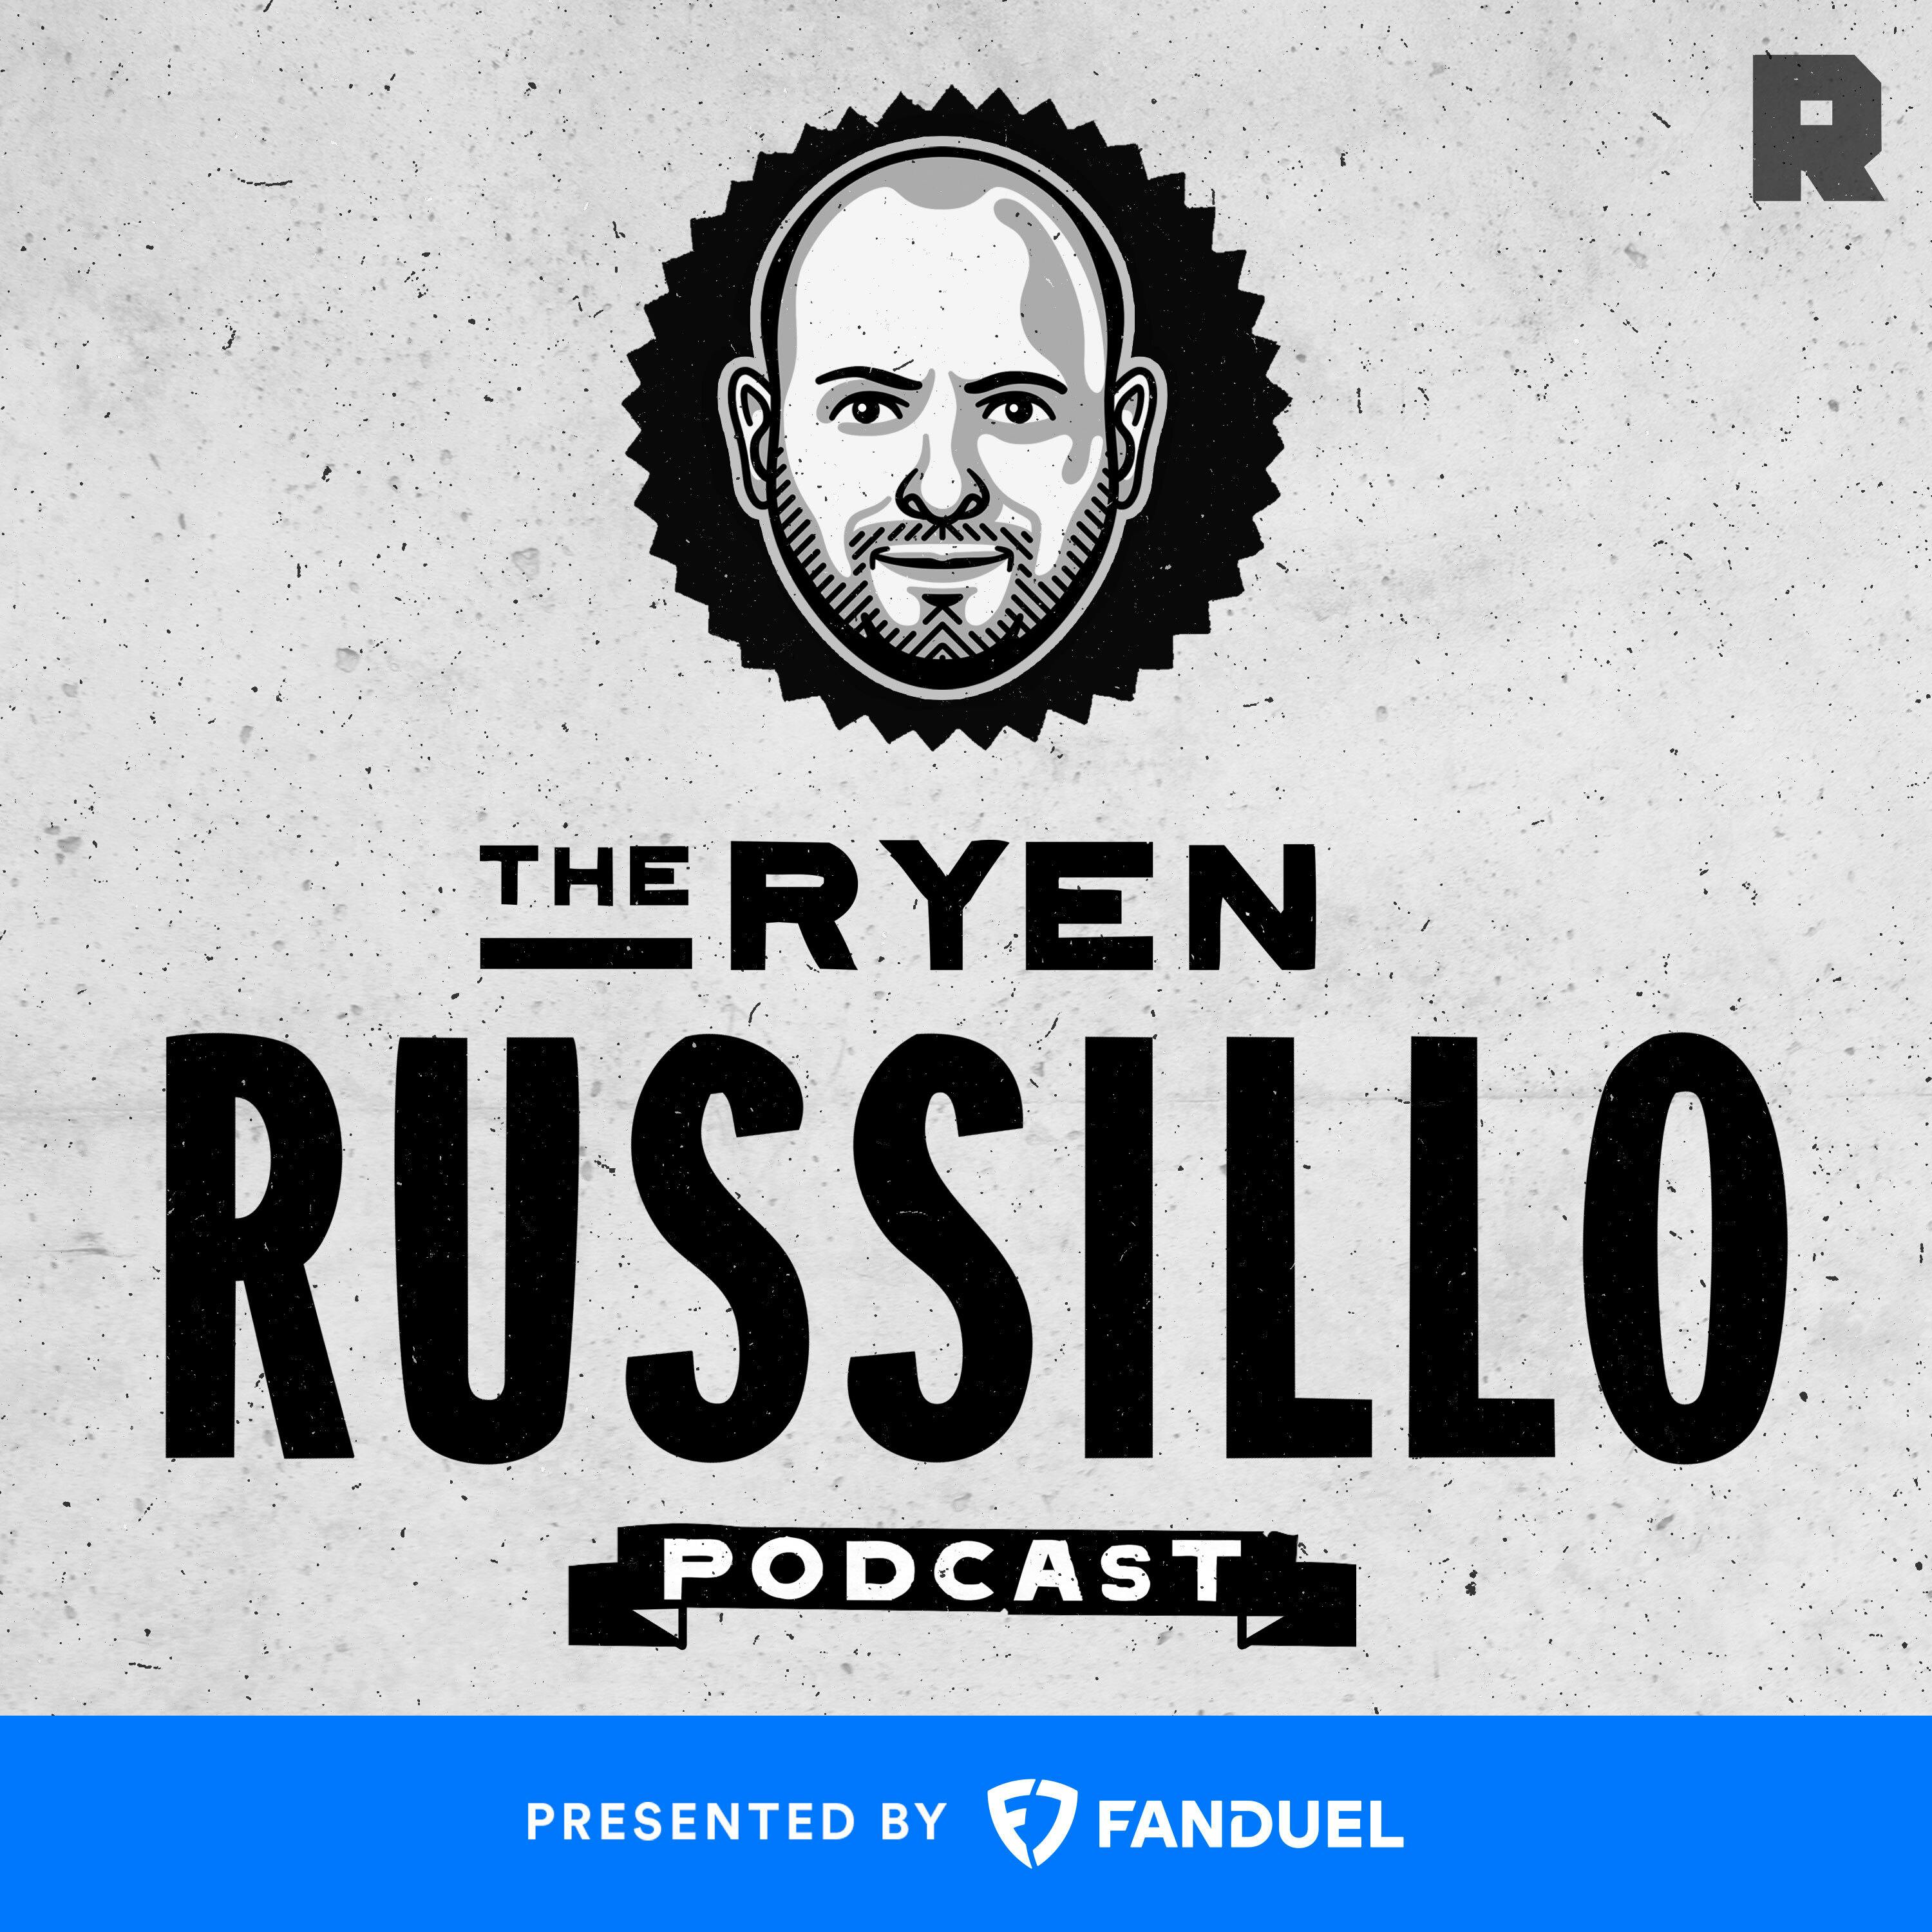 The Ryen Russillo Podcast podcast show image